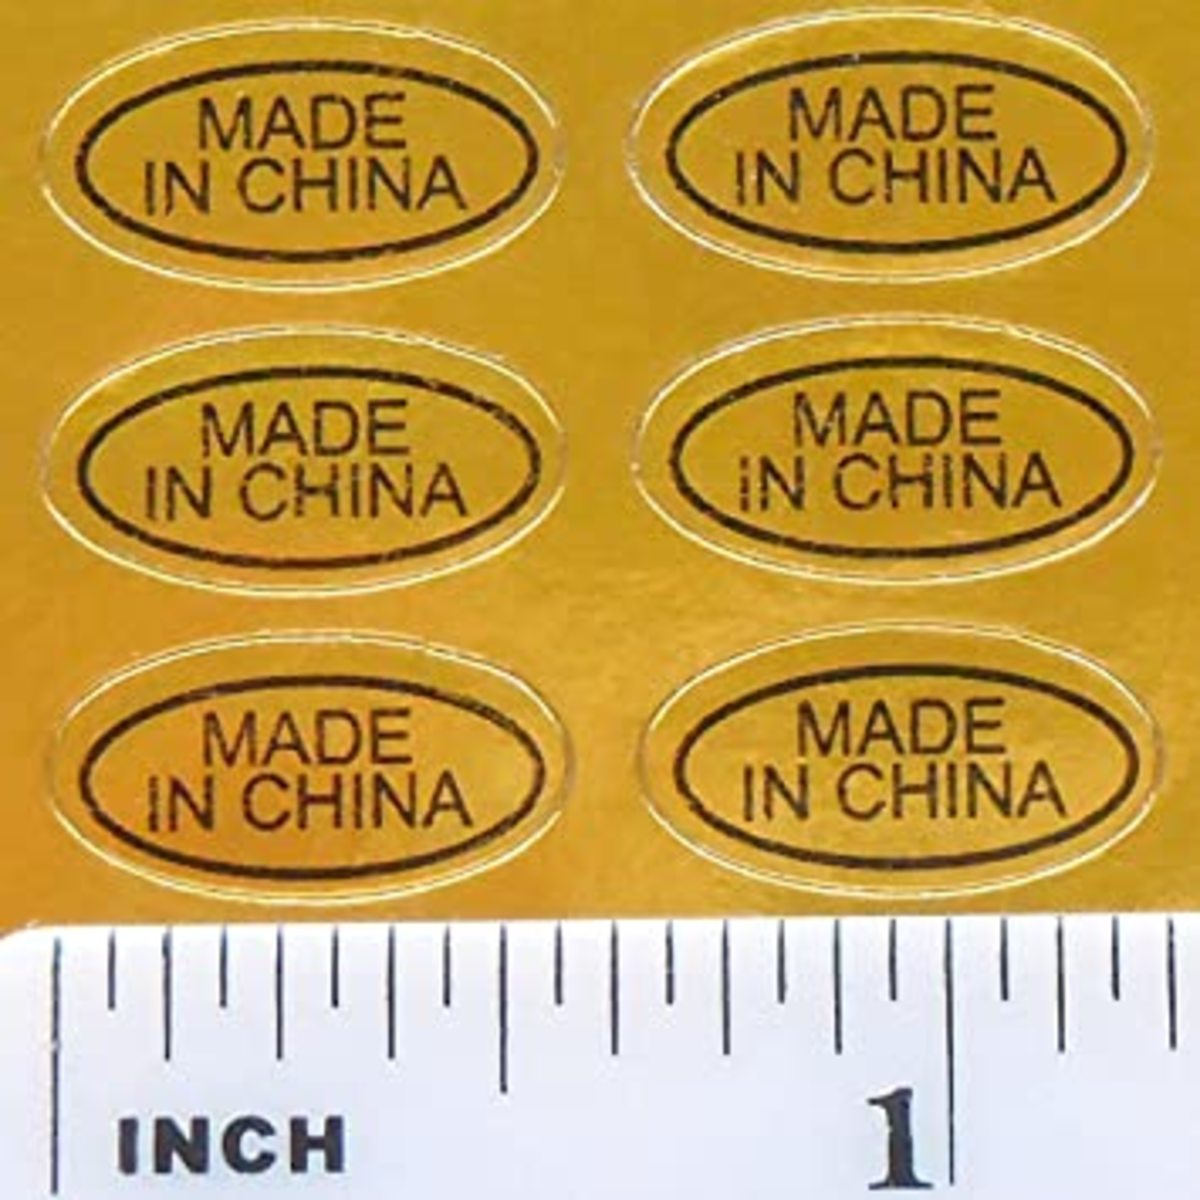 Made in China; Hopefully, Not Made to Last